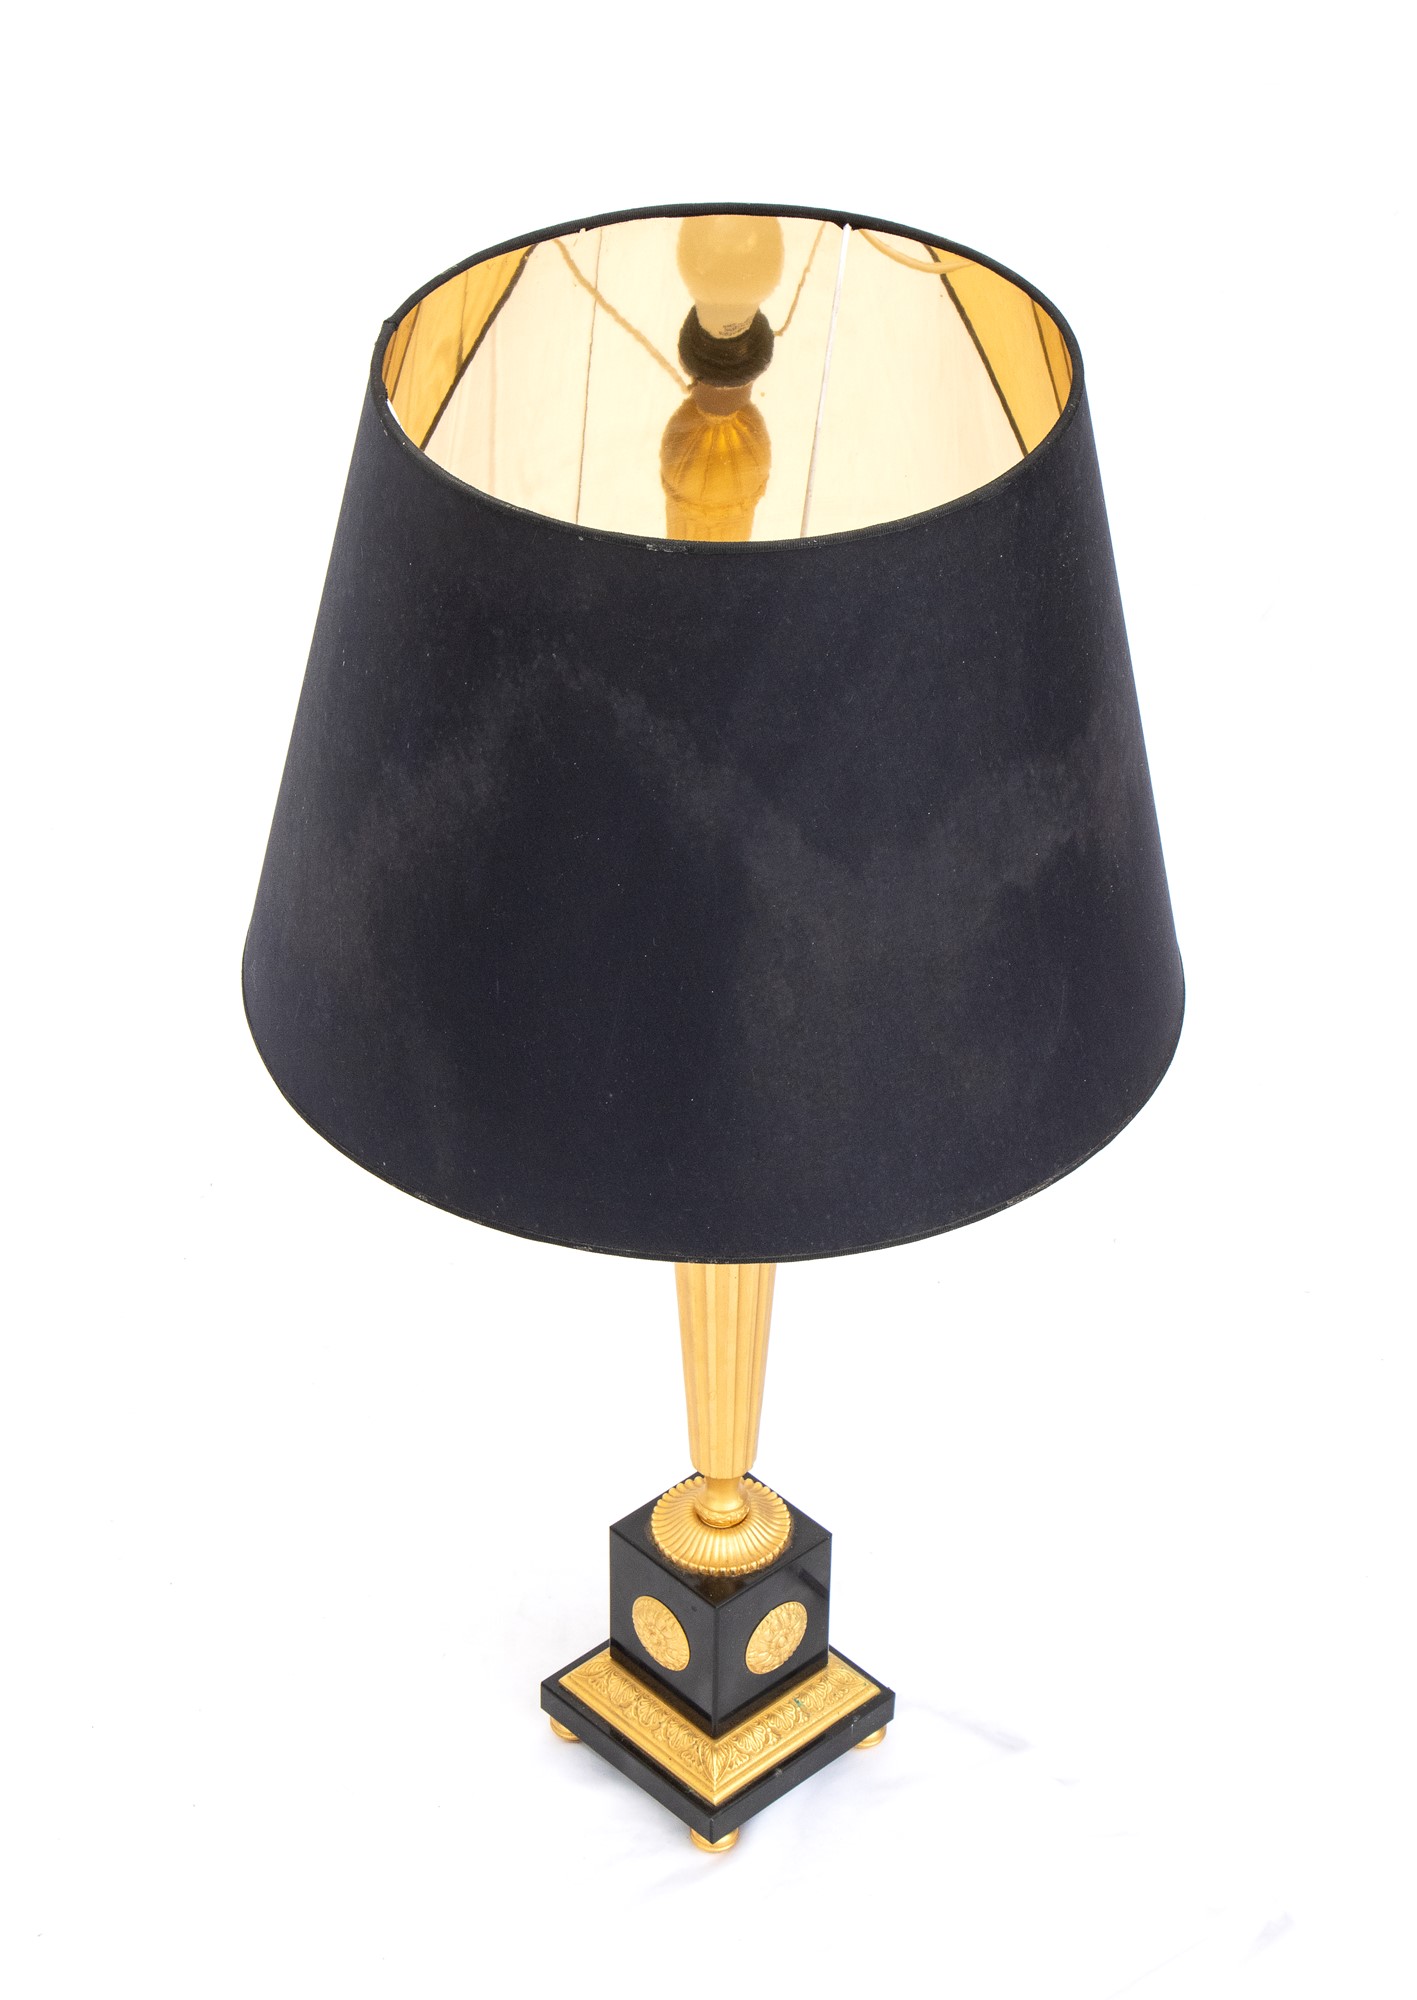 Empire style table lamp - Image 5 of 5